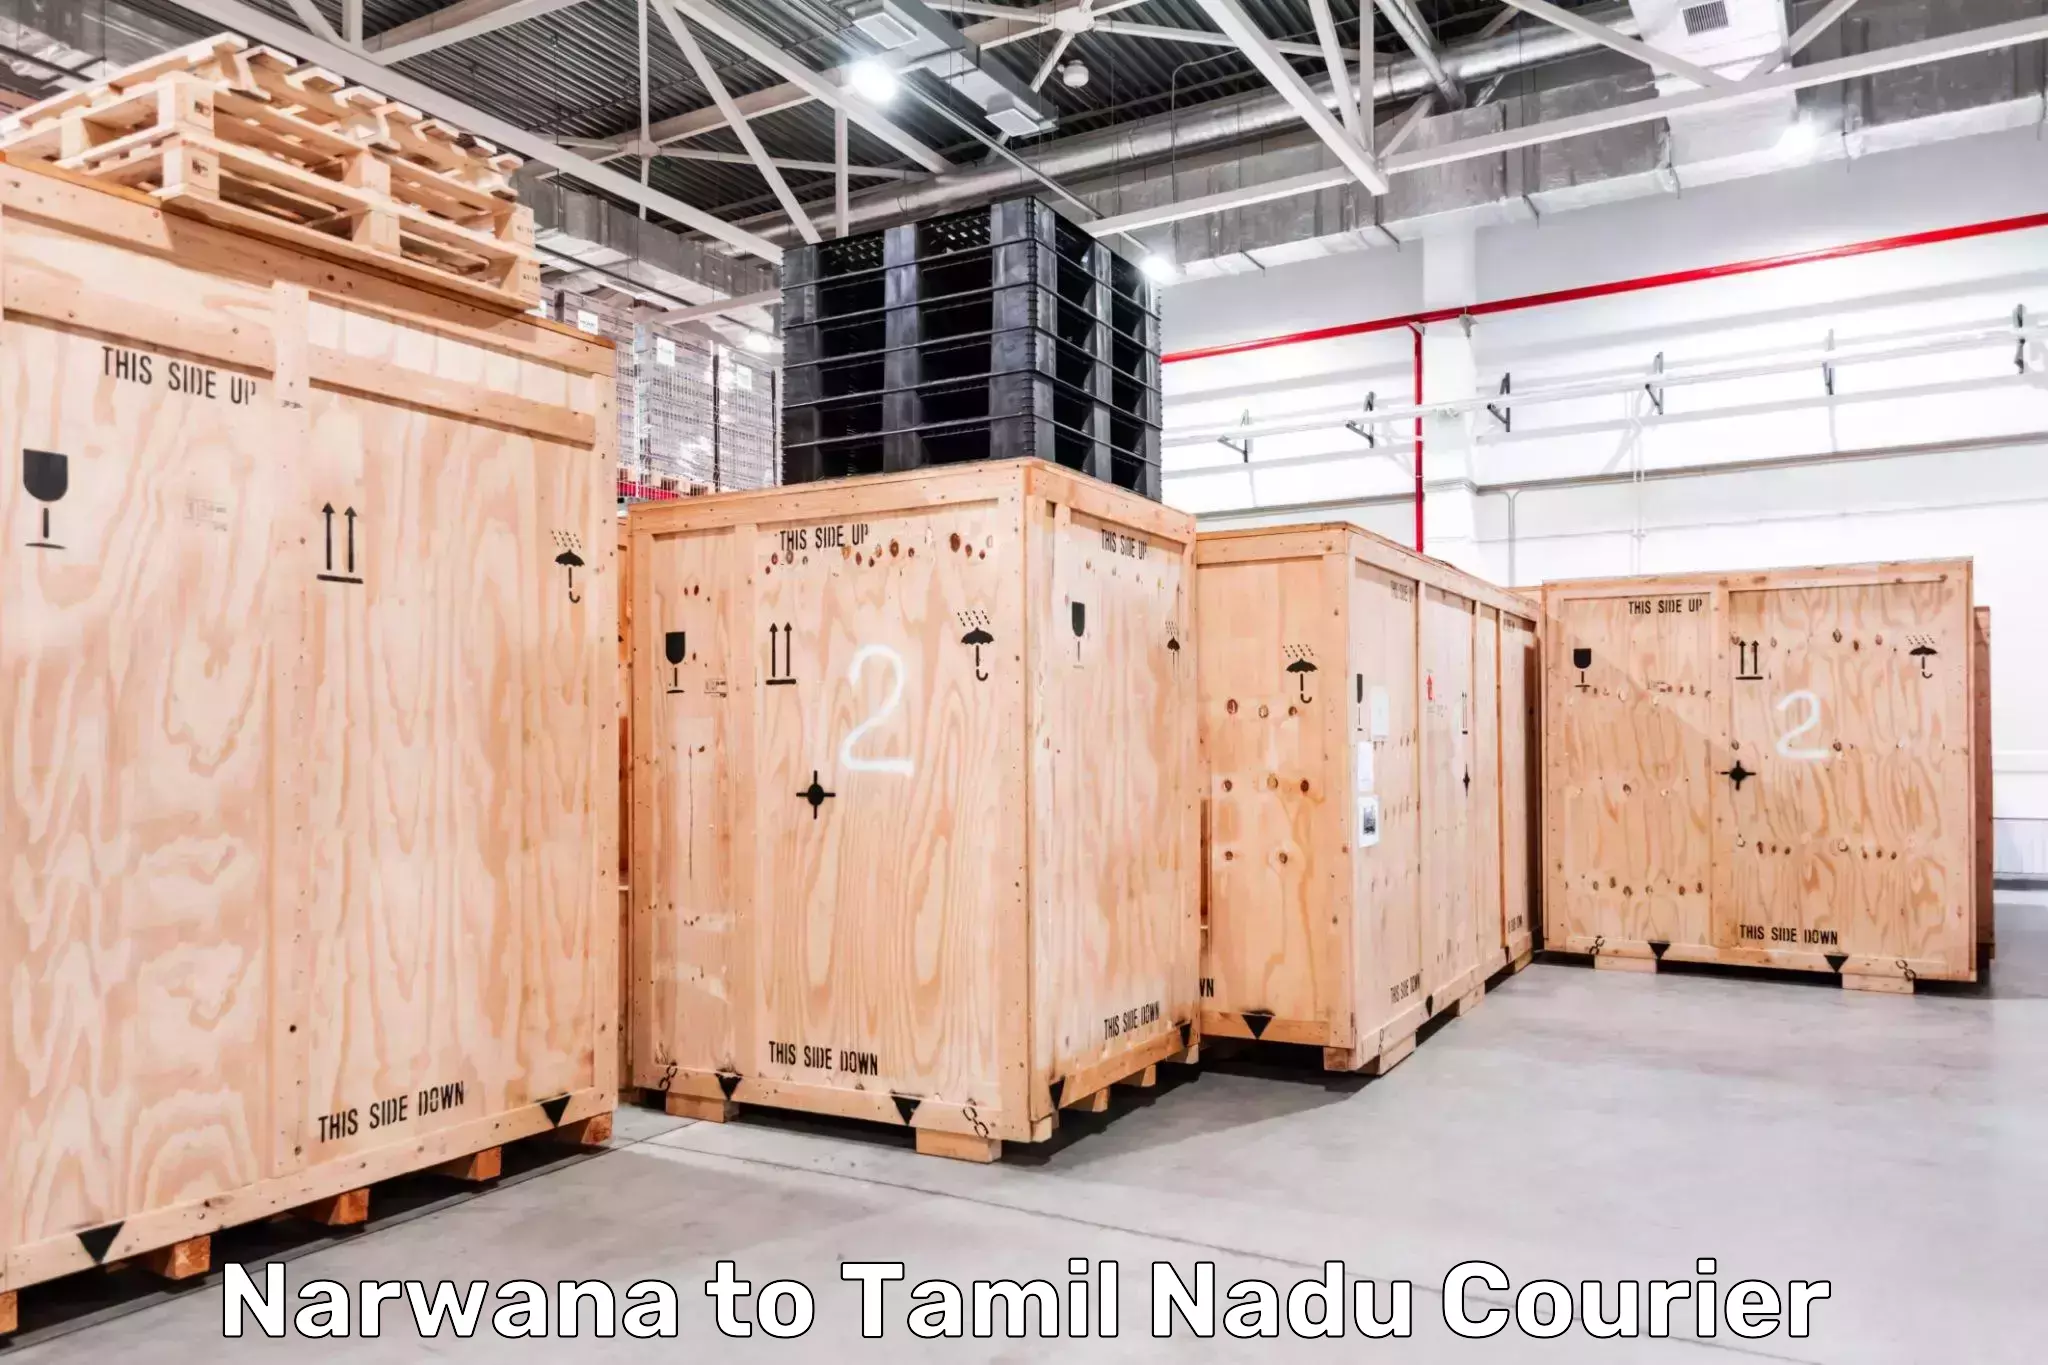 State-of-the-art courier technology Narwana to Mylapore